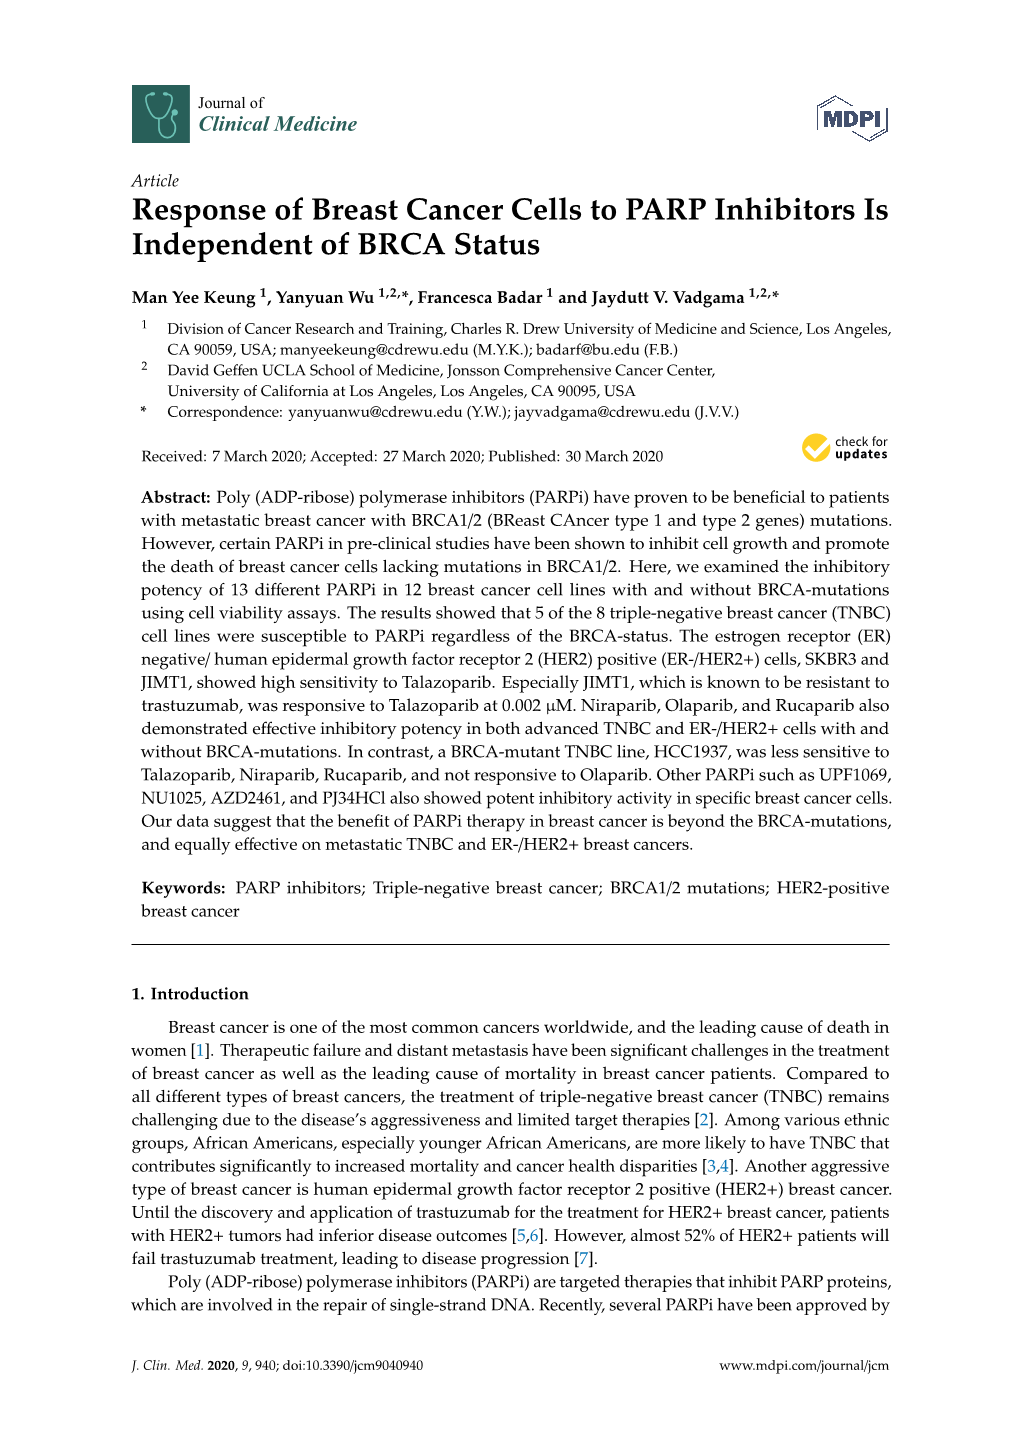 Response of Breast Cancer Cells to PARP Inhibitors Is Independent of BRCA Status